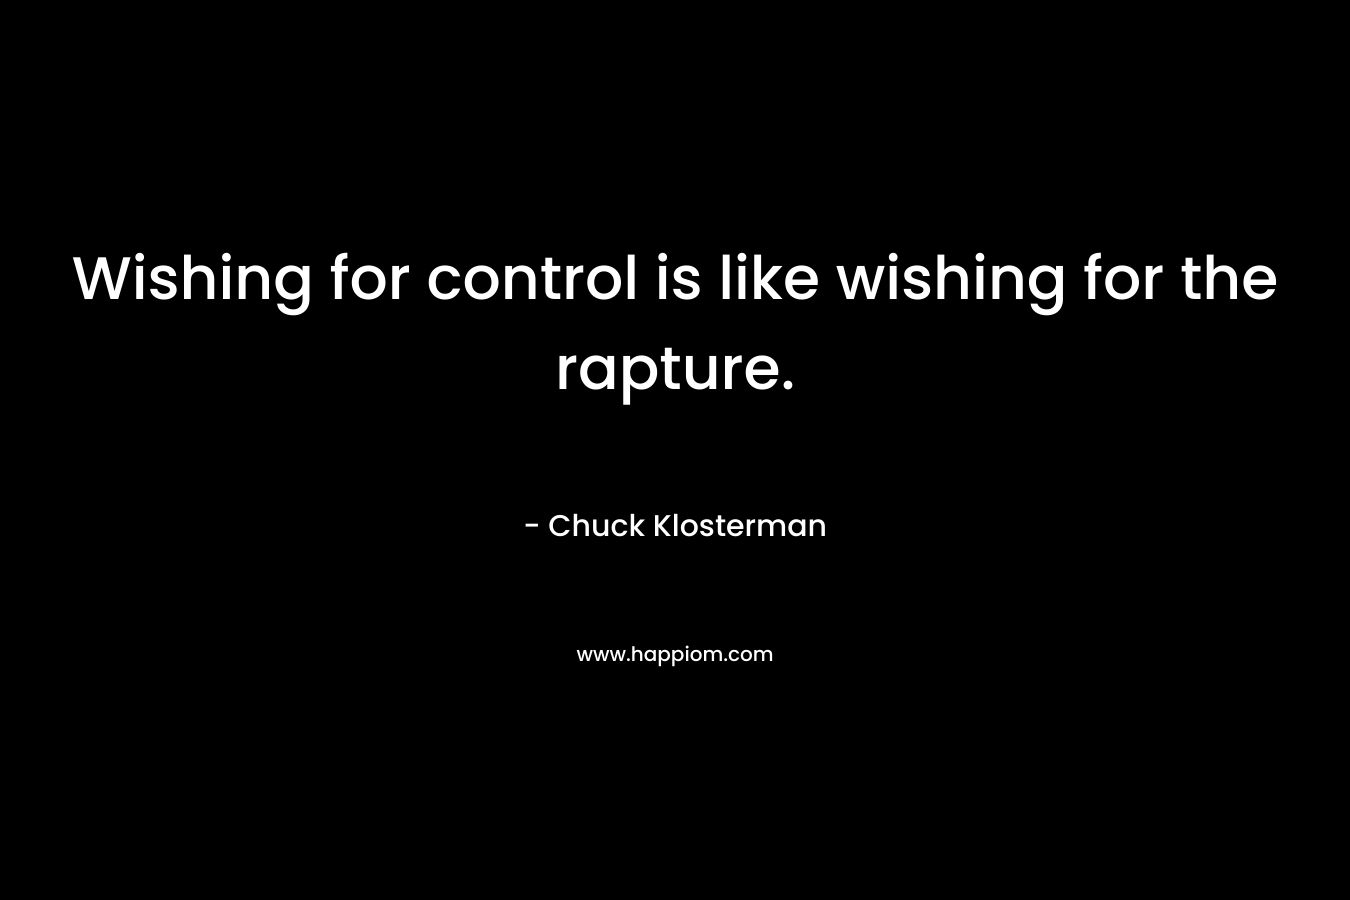 Wishing for control is like wishing for the rapture. – Chuck Klosterman